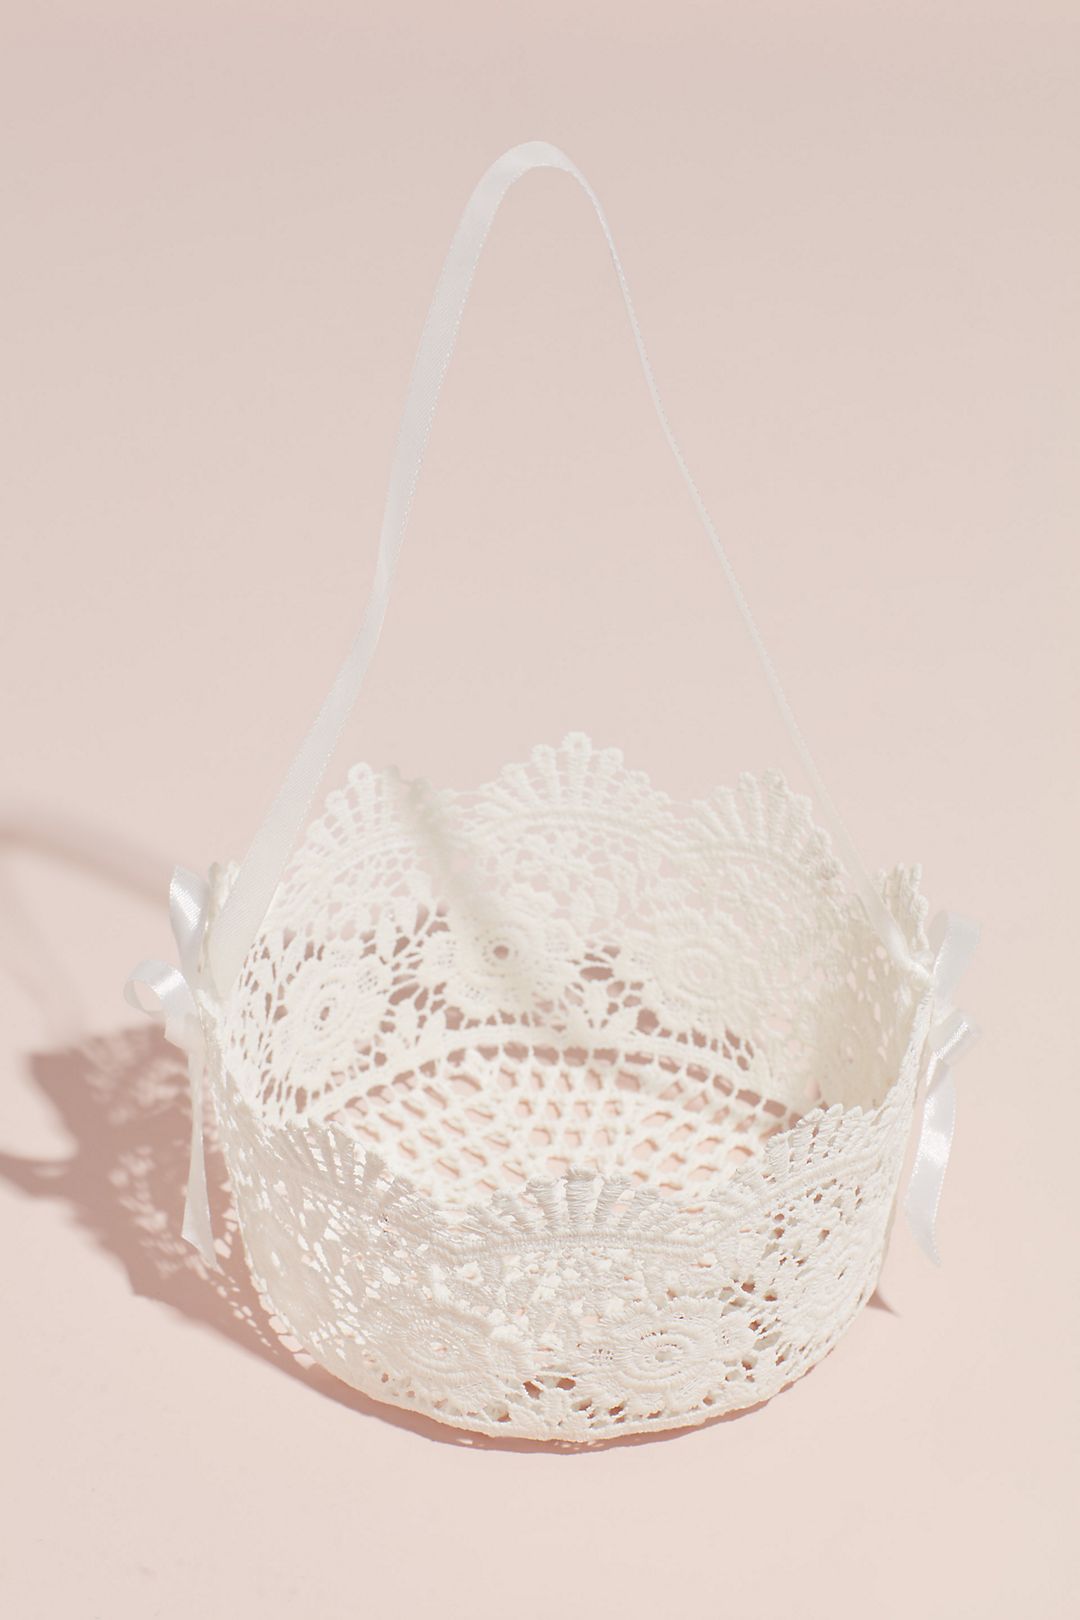 Cutout Flower Girl Basket with Bow Ribbon Handle Image